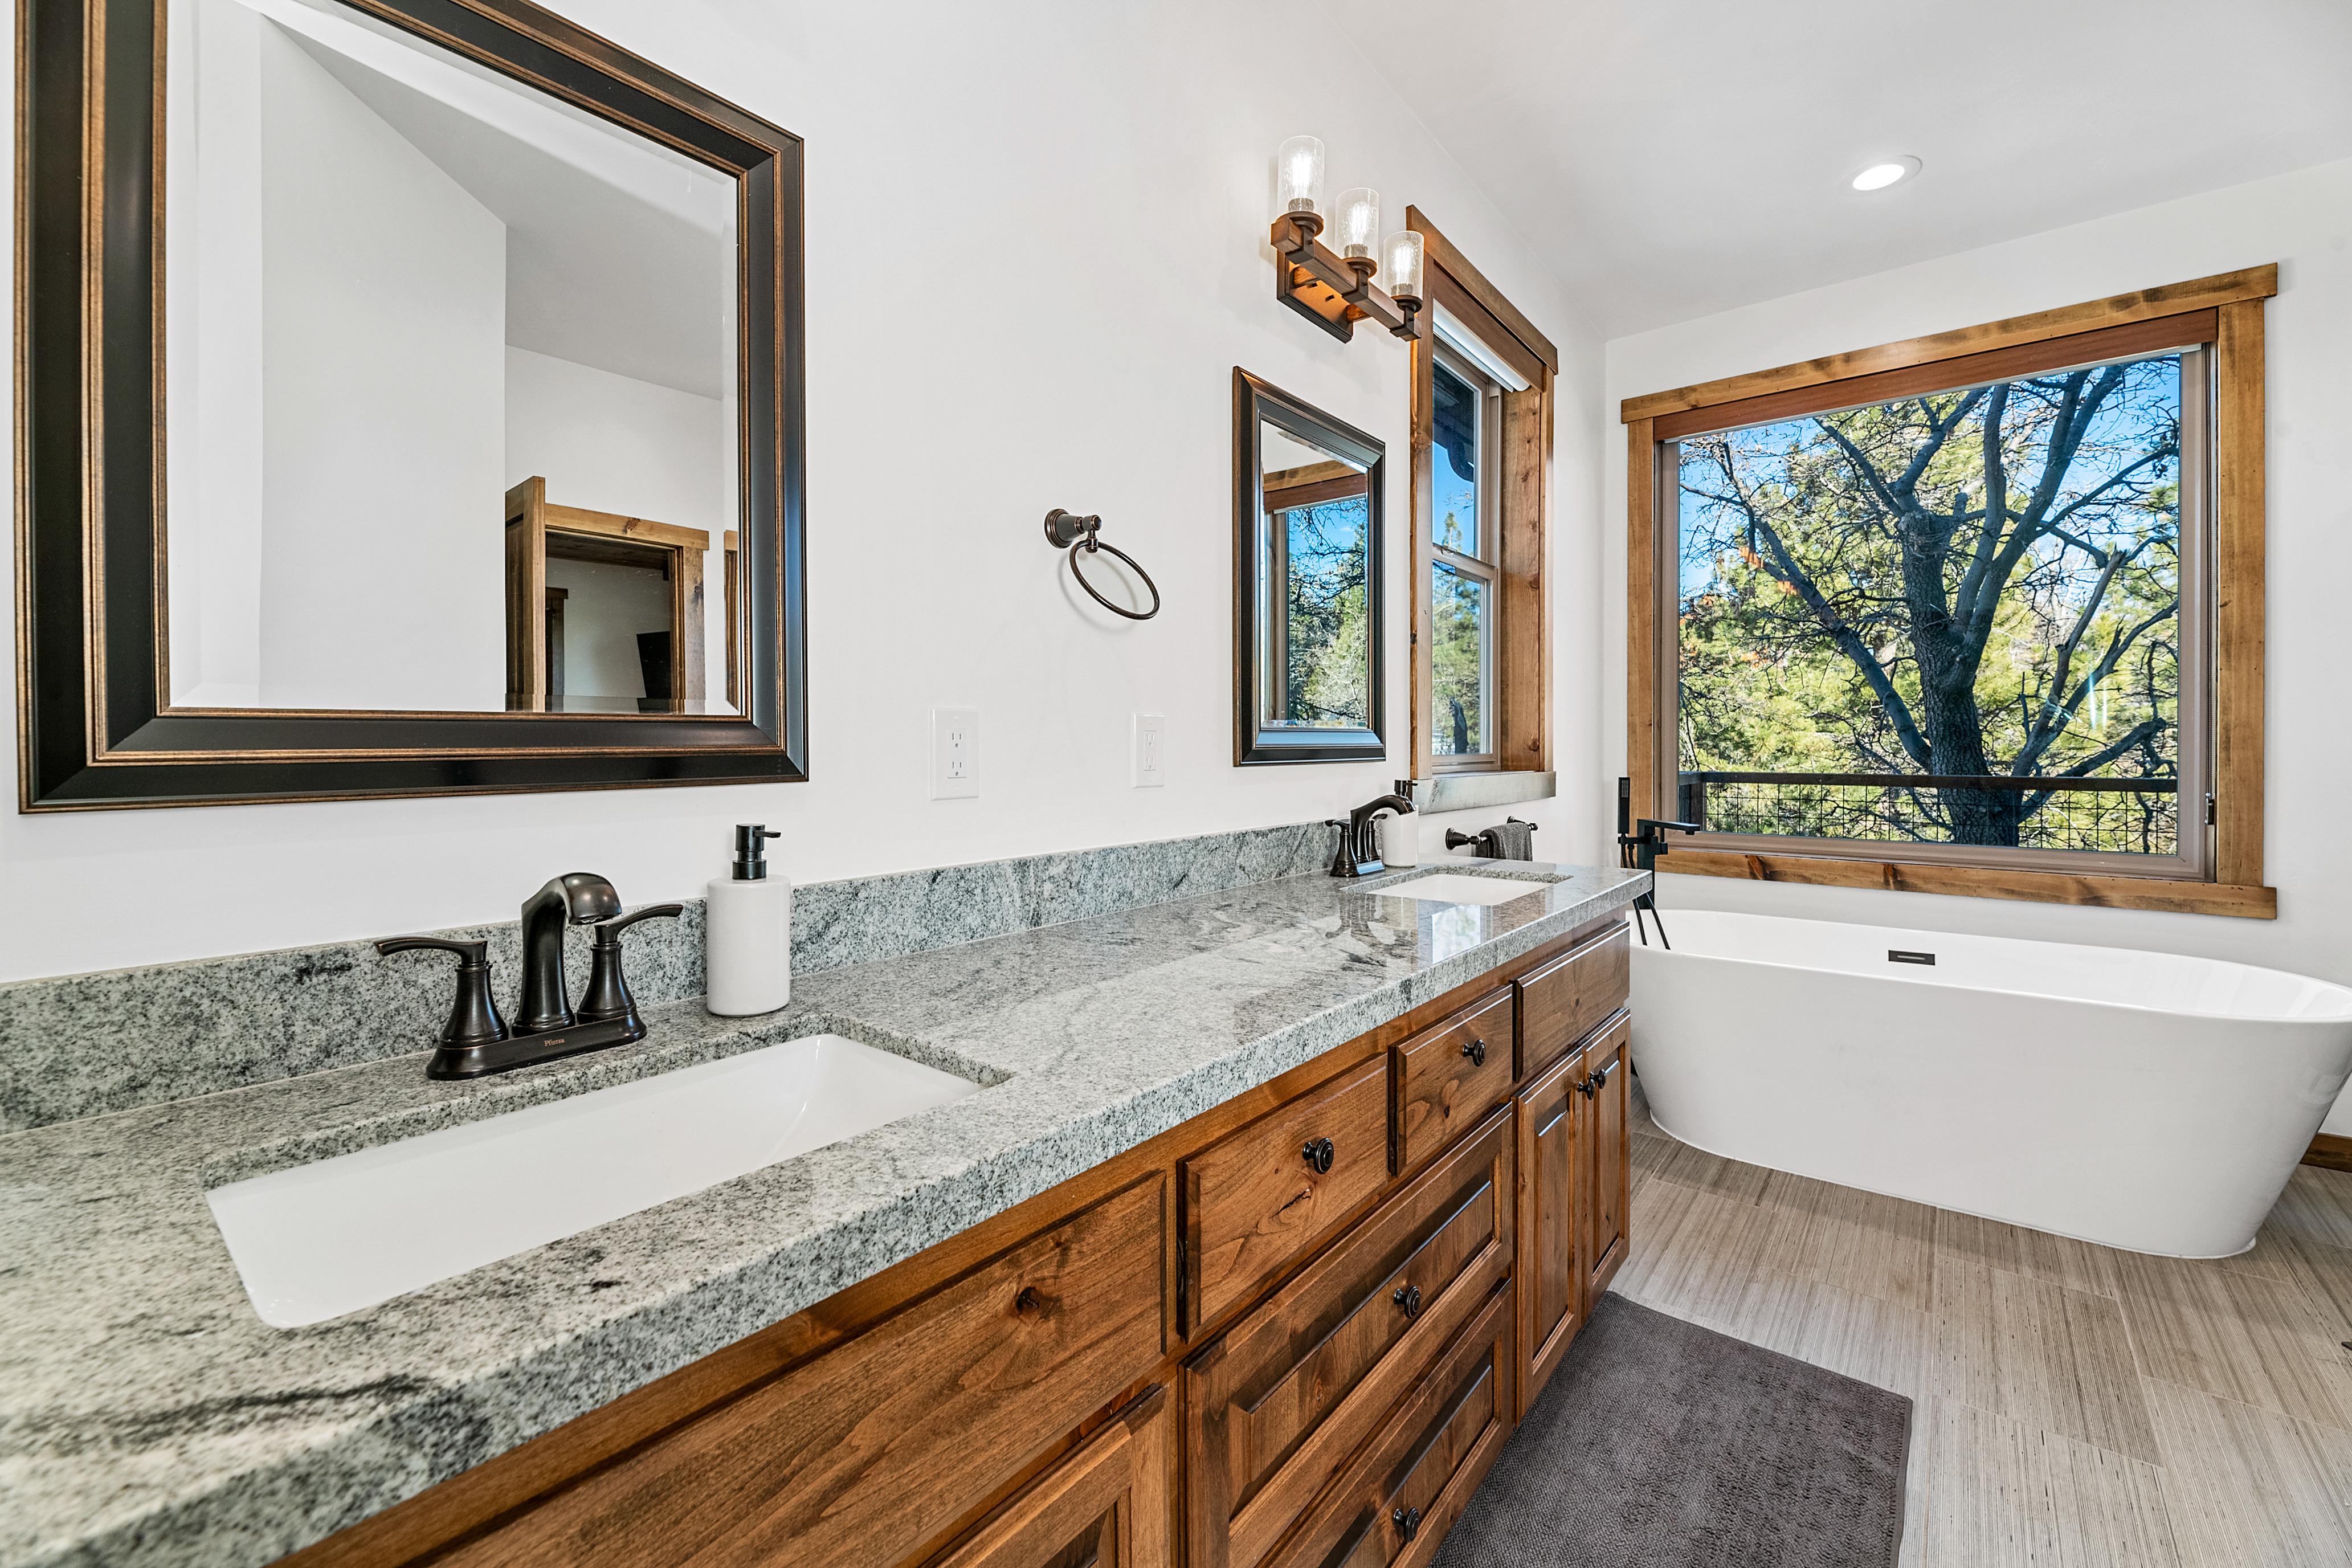 MOONLIGHT LODGE - VIEWS! 5-STAR Luxury cabin, Private Hot Tub, Game Room, NEW 2022 construction, Beautiful vaulted ceilings, wood support beams, and a beautiful open kitchen. Located in Upper Moonridge.